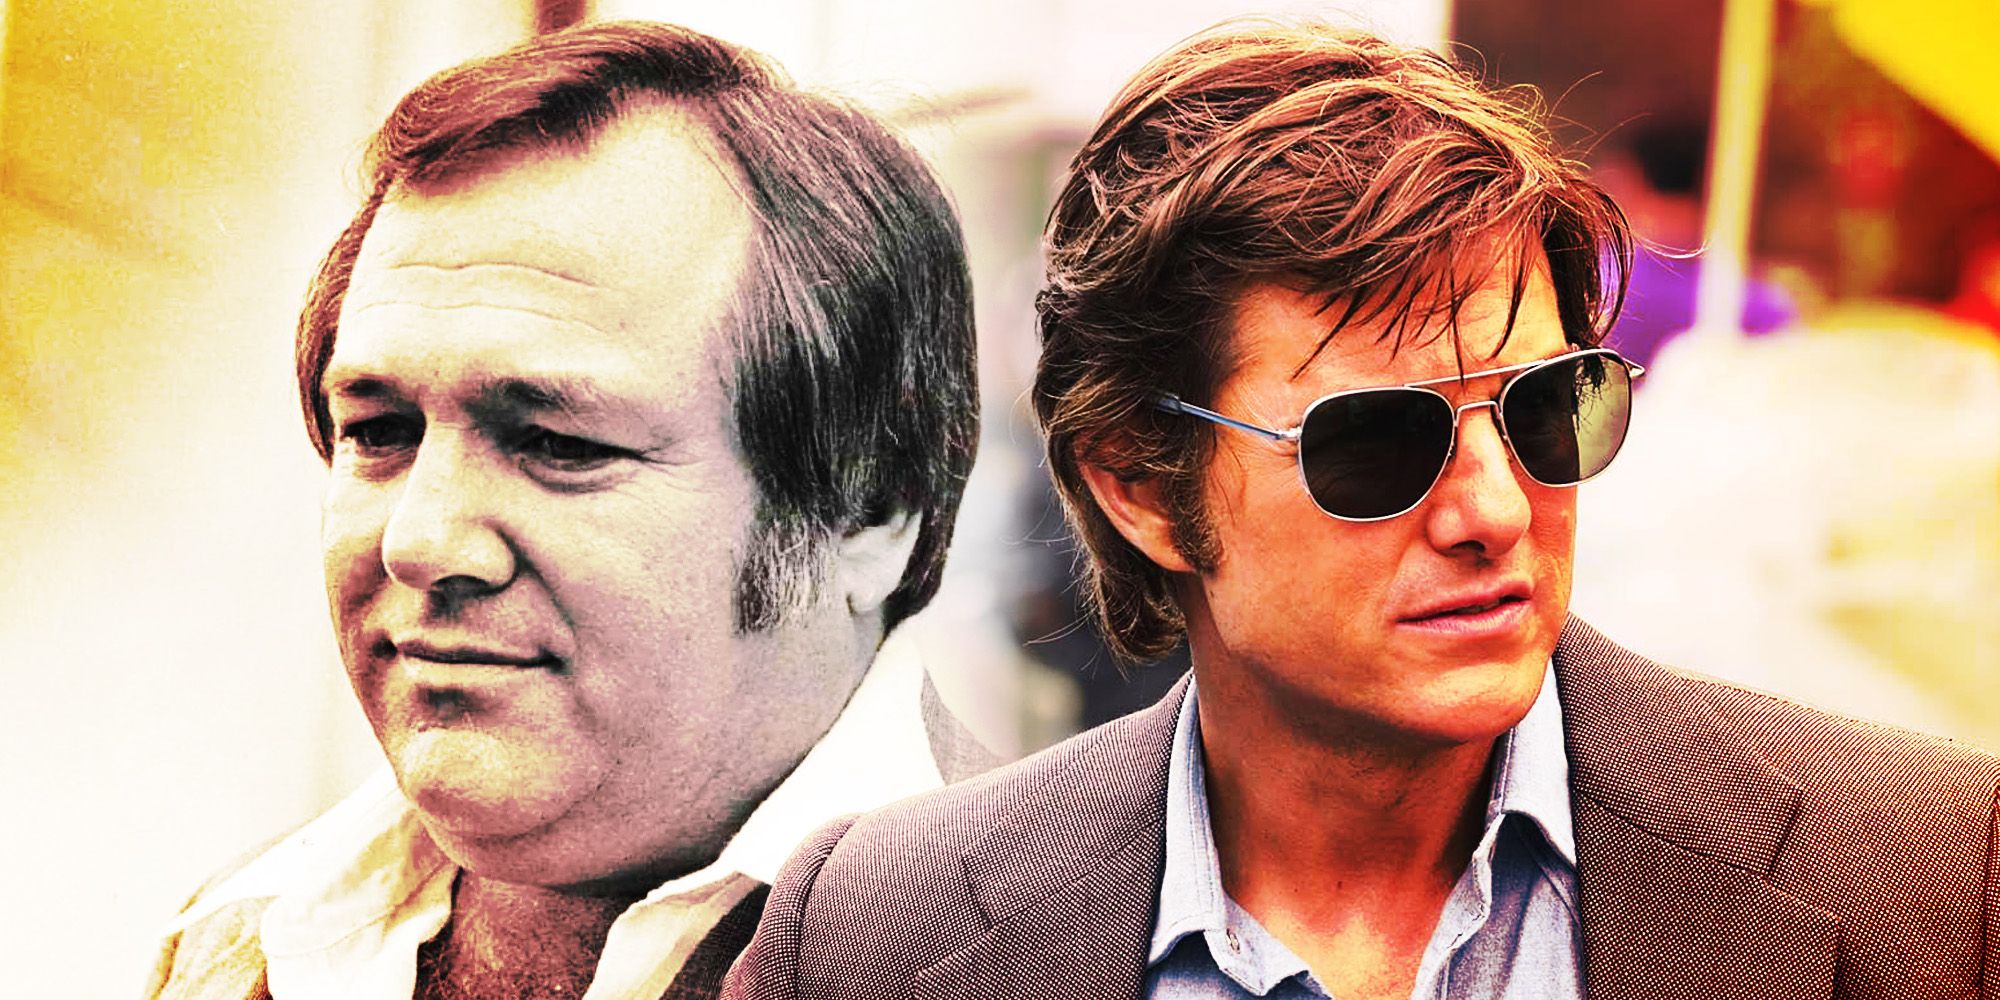 Barry Seal and Tom Cruise as Barry Seal in American Made.